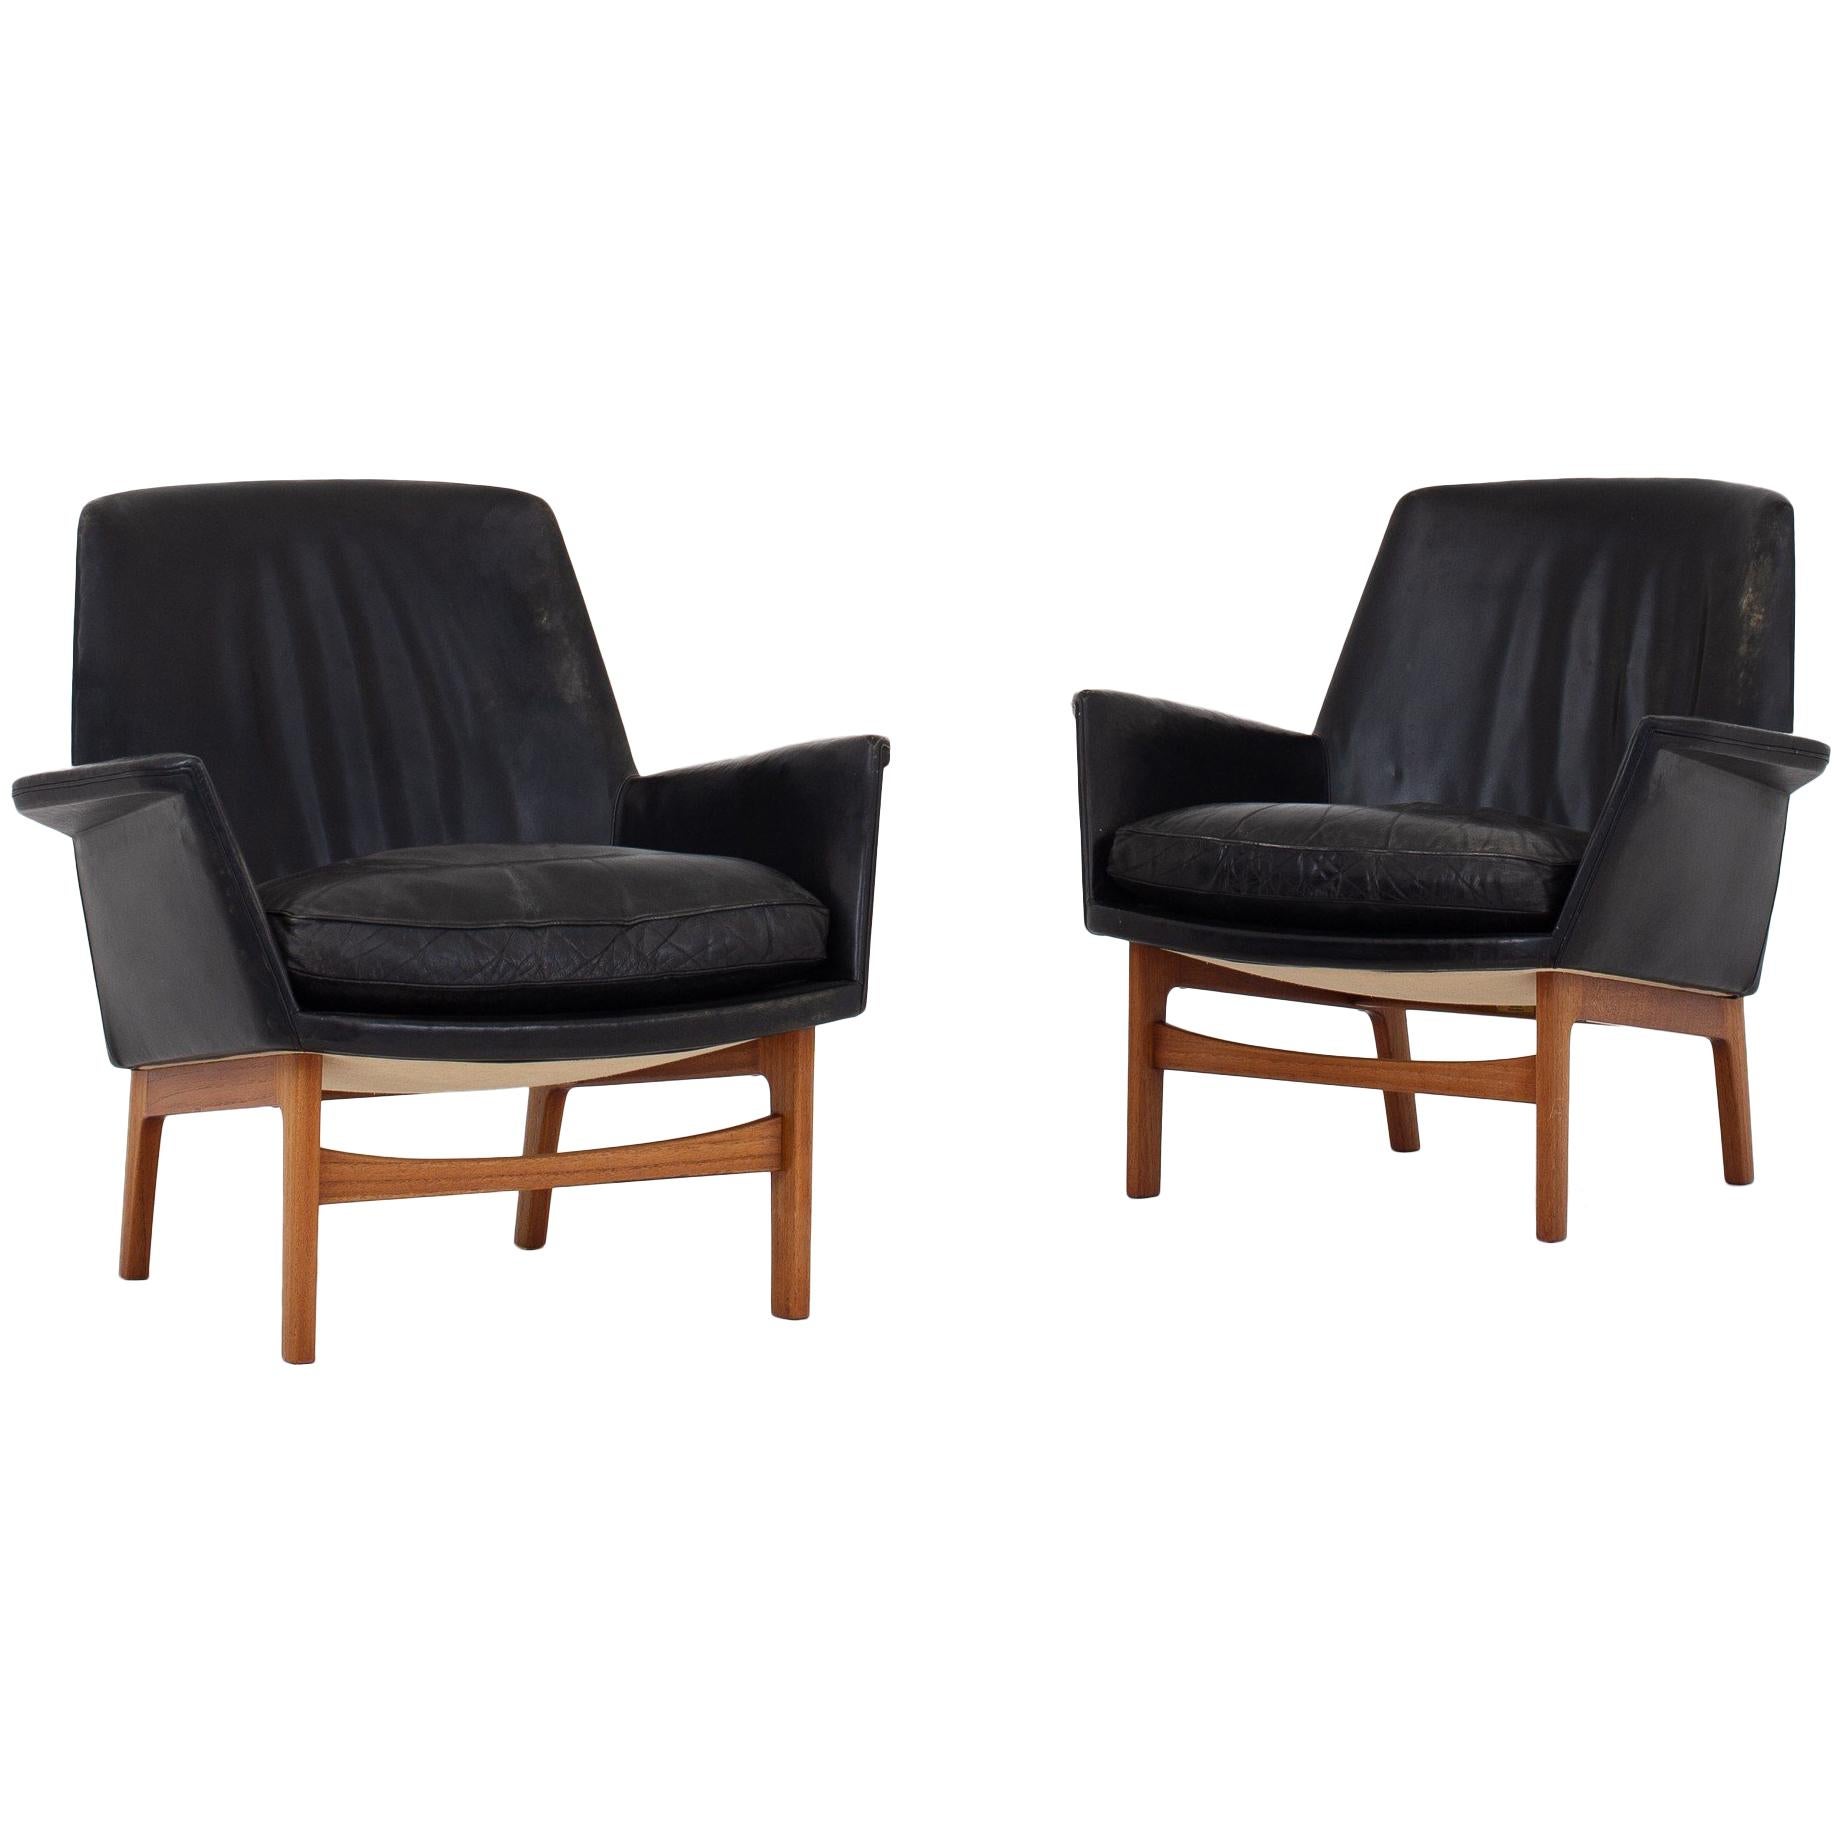 Set of Two Easy Chairs with Stool by Tove & Edvard Kindt Larsen